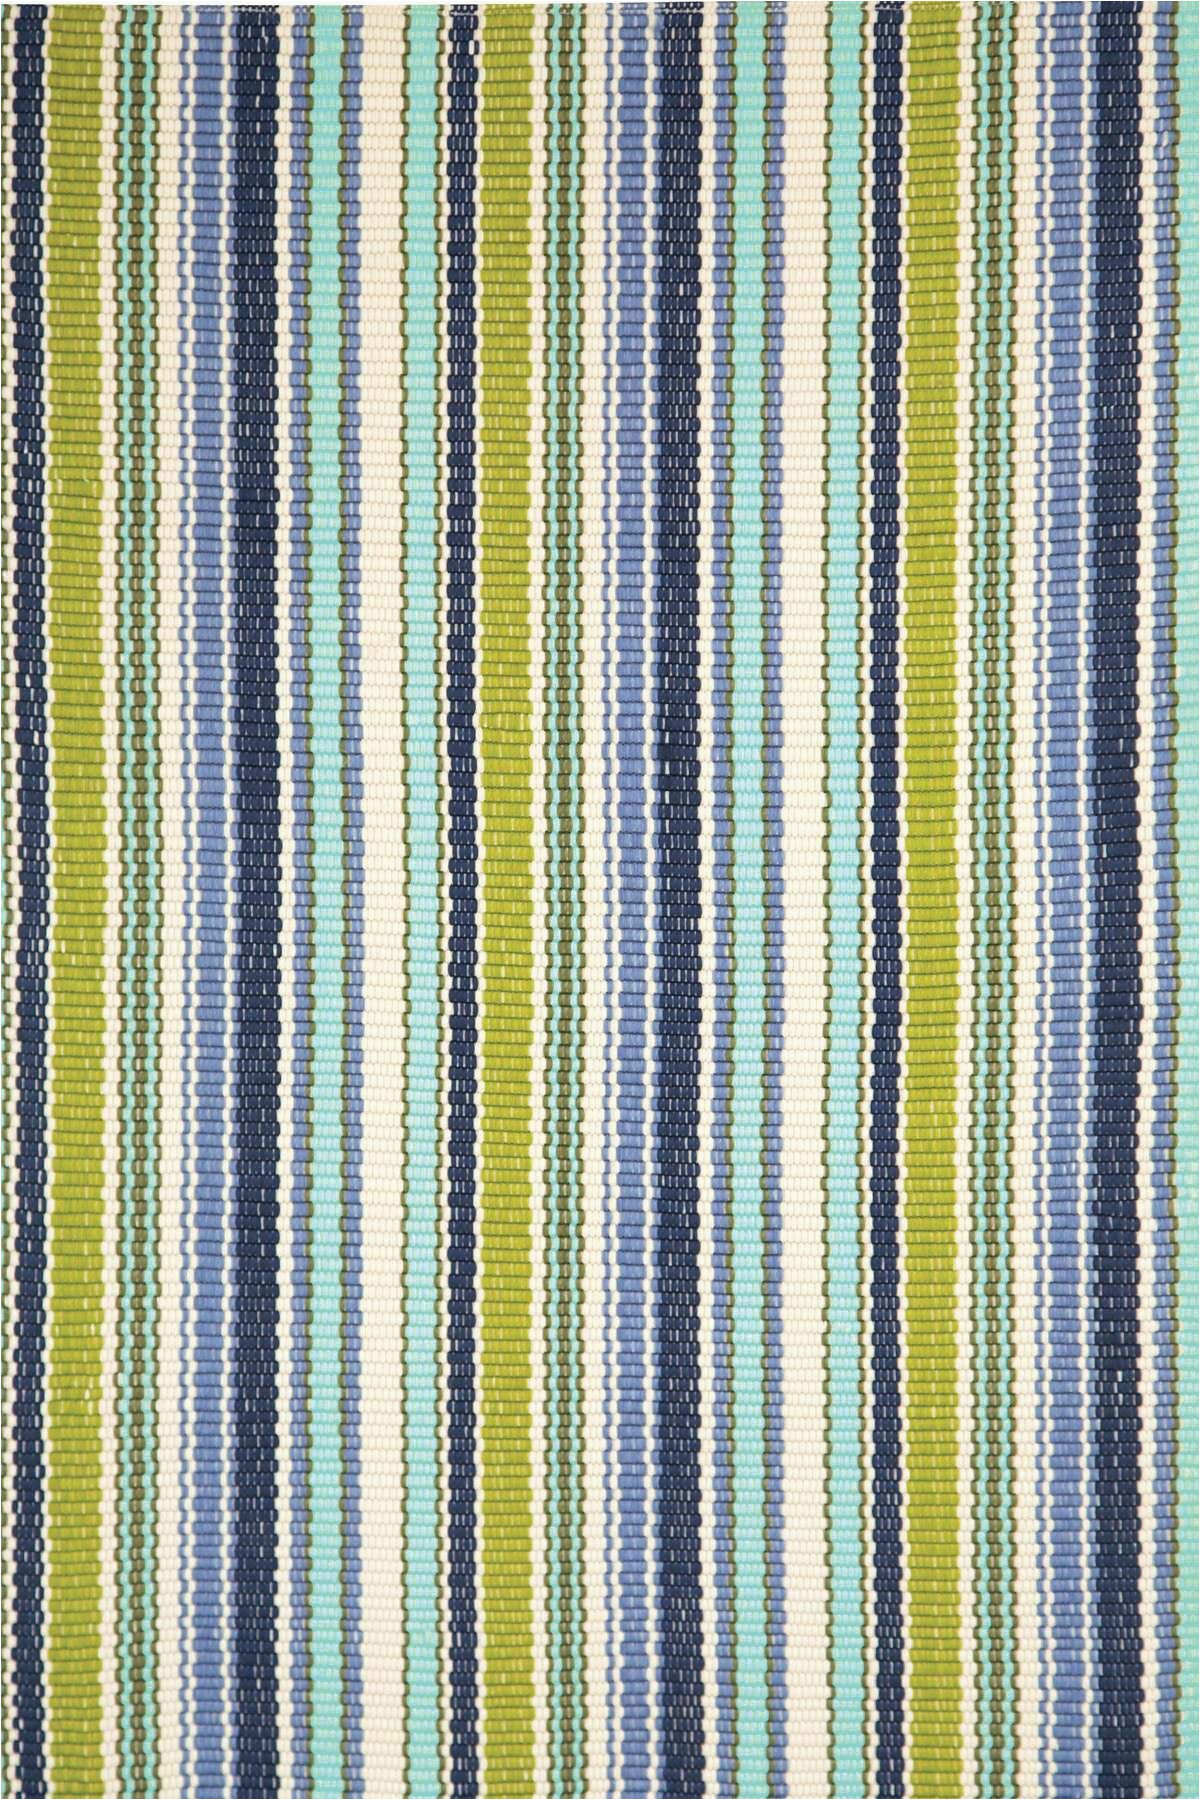 Blue Green Striped Rug Pond Striped Handwoven Blue Green White Indoor Outdoor area Rug